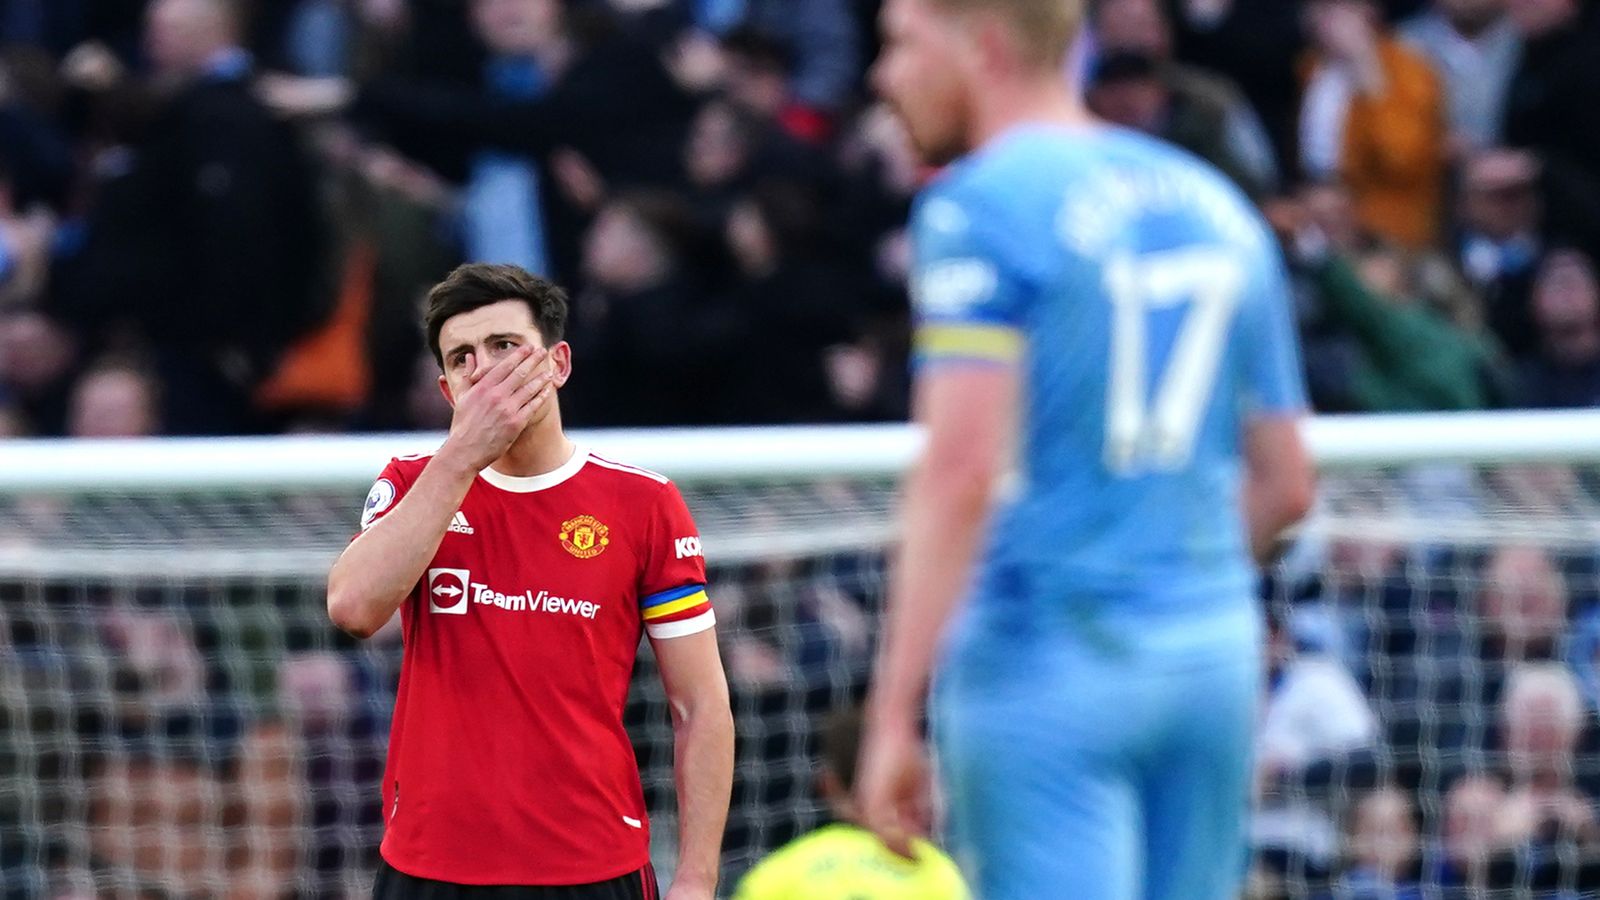 Gary Neville: Man Utd response at Man City was embarrassing – they threw the towel in